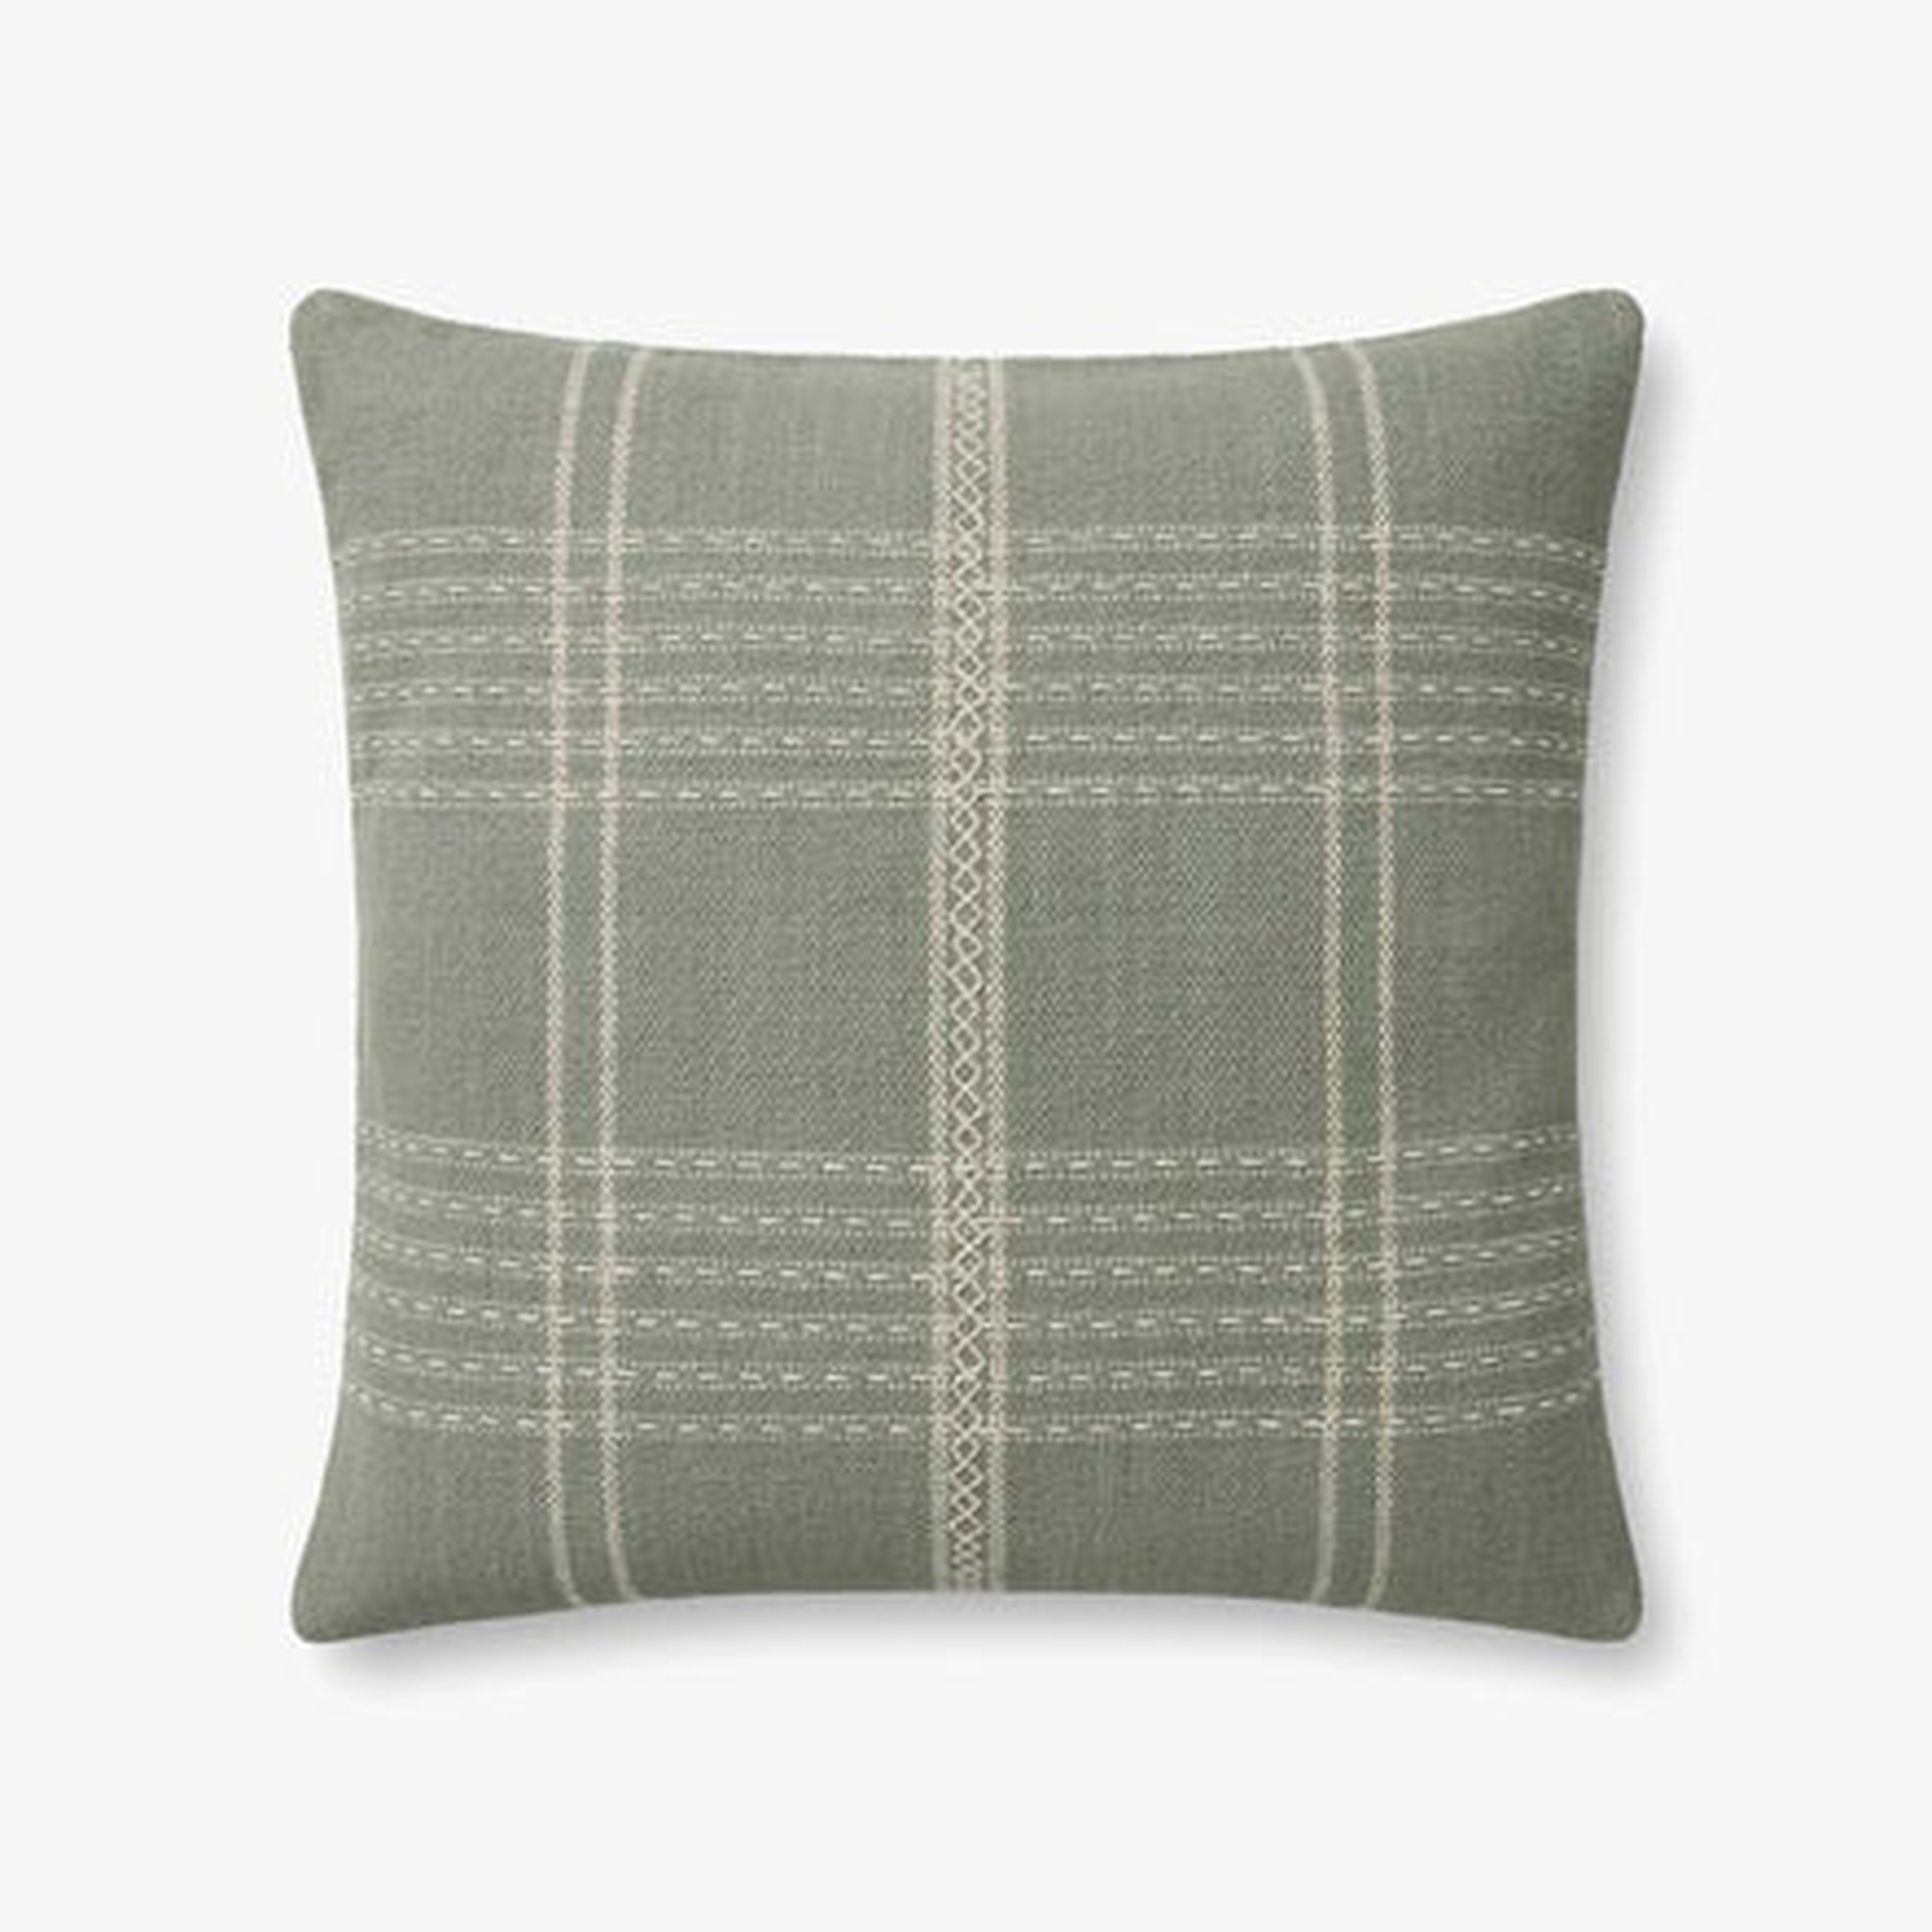 Magnolia Home by Joanna Gaines x Loloi Pillows PMH0014 Sage 22" x 22" Cover w/Down - Loloi Rugs